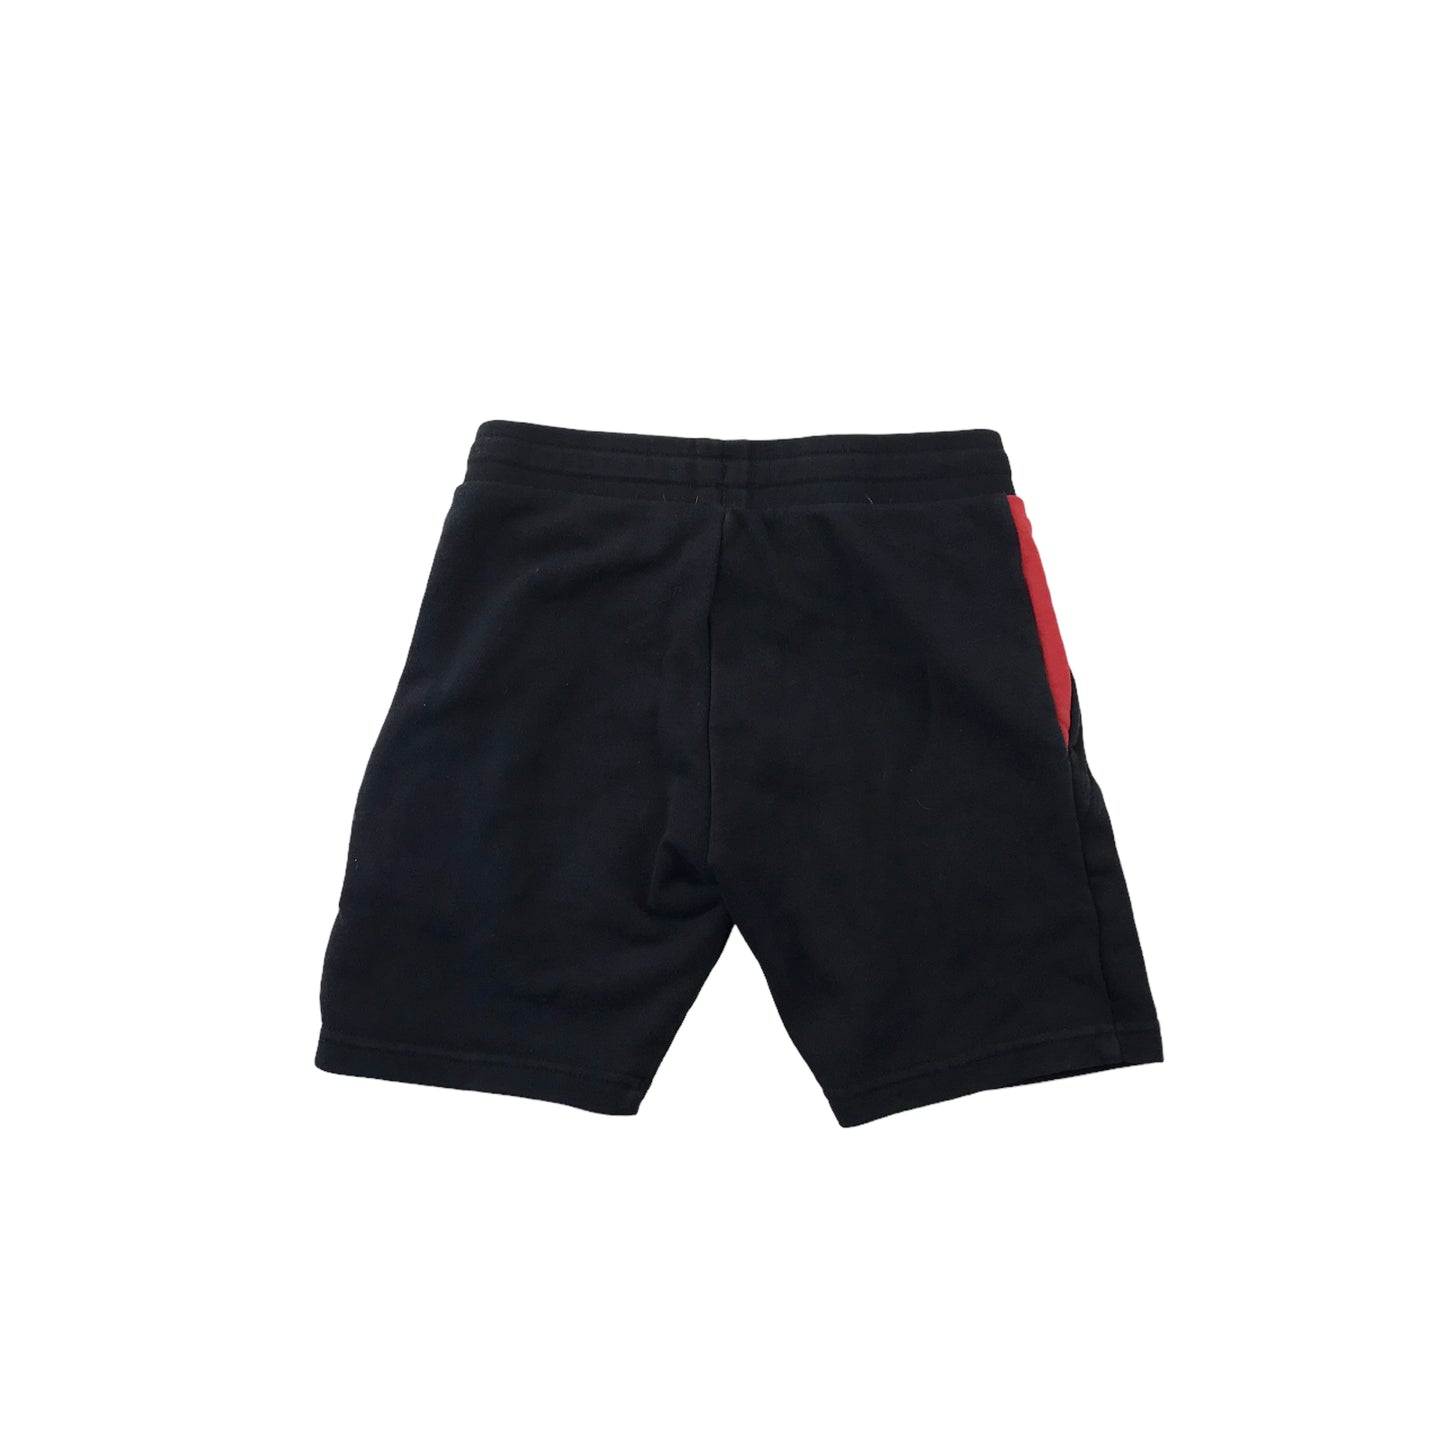 Adidas Adventure Black and Red Jersey Shorts Age 5